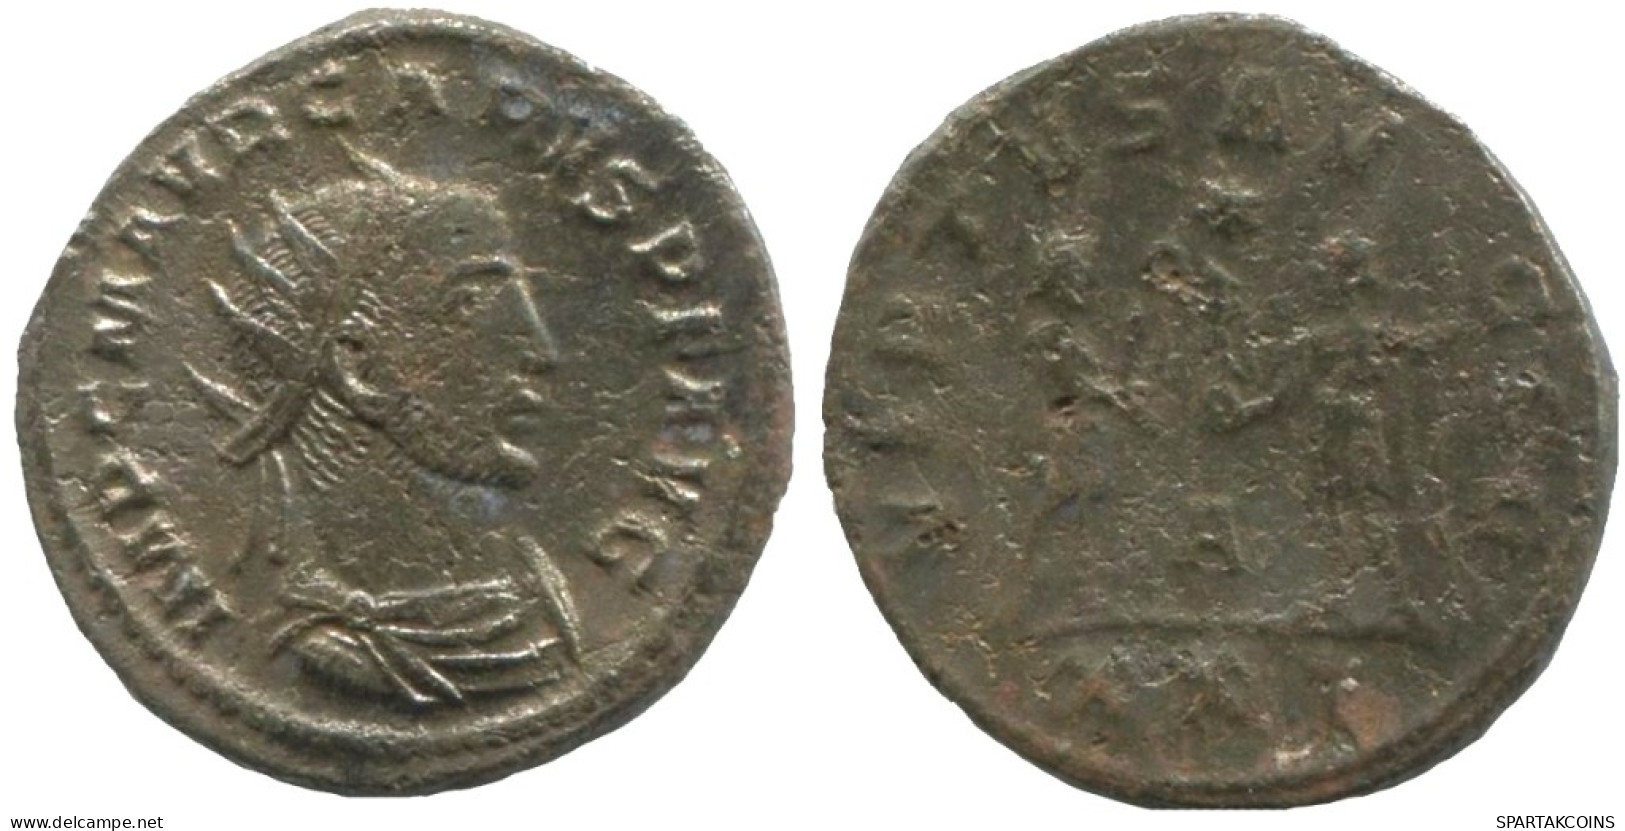 CARUS ANTONINIANUS Antioch (A / XXI) AD 282-283 VIRTVS AVGG #ANT1865.48.D.A - The Military Crisis (235 AD To 284 AD)